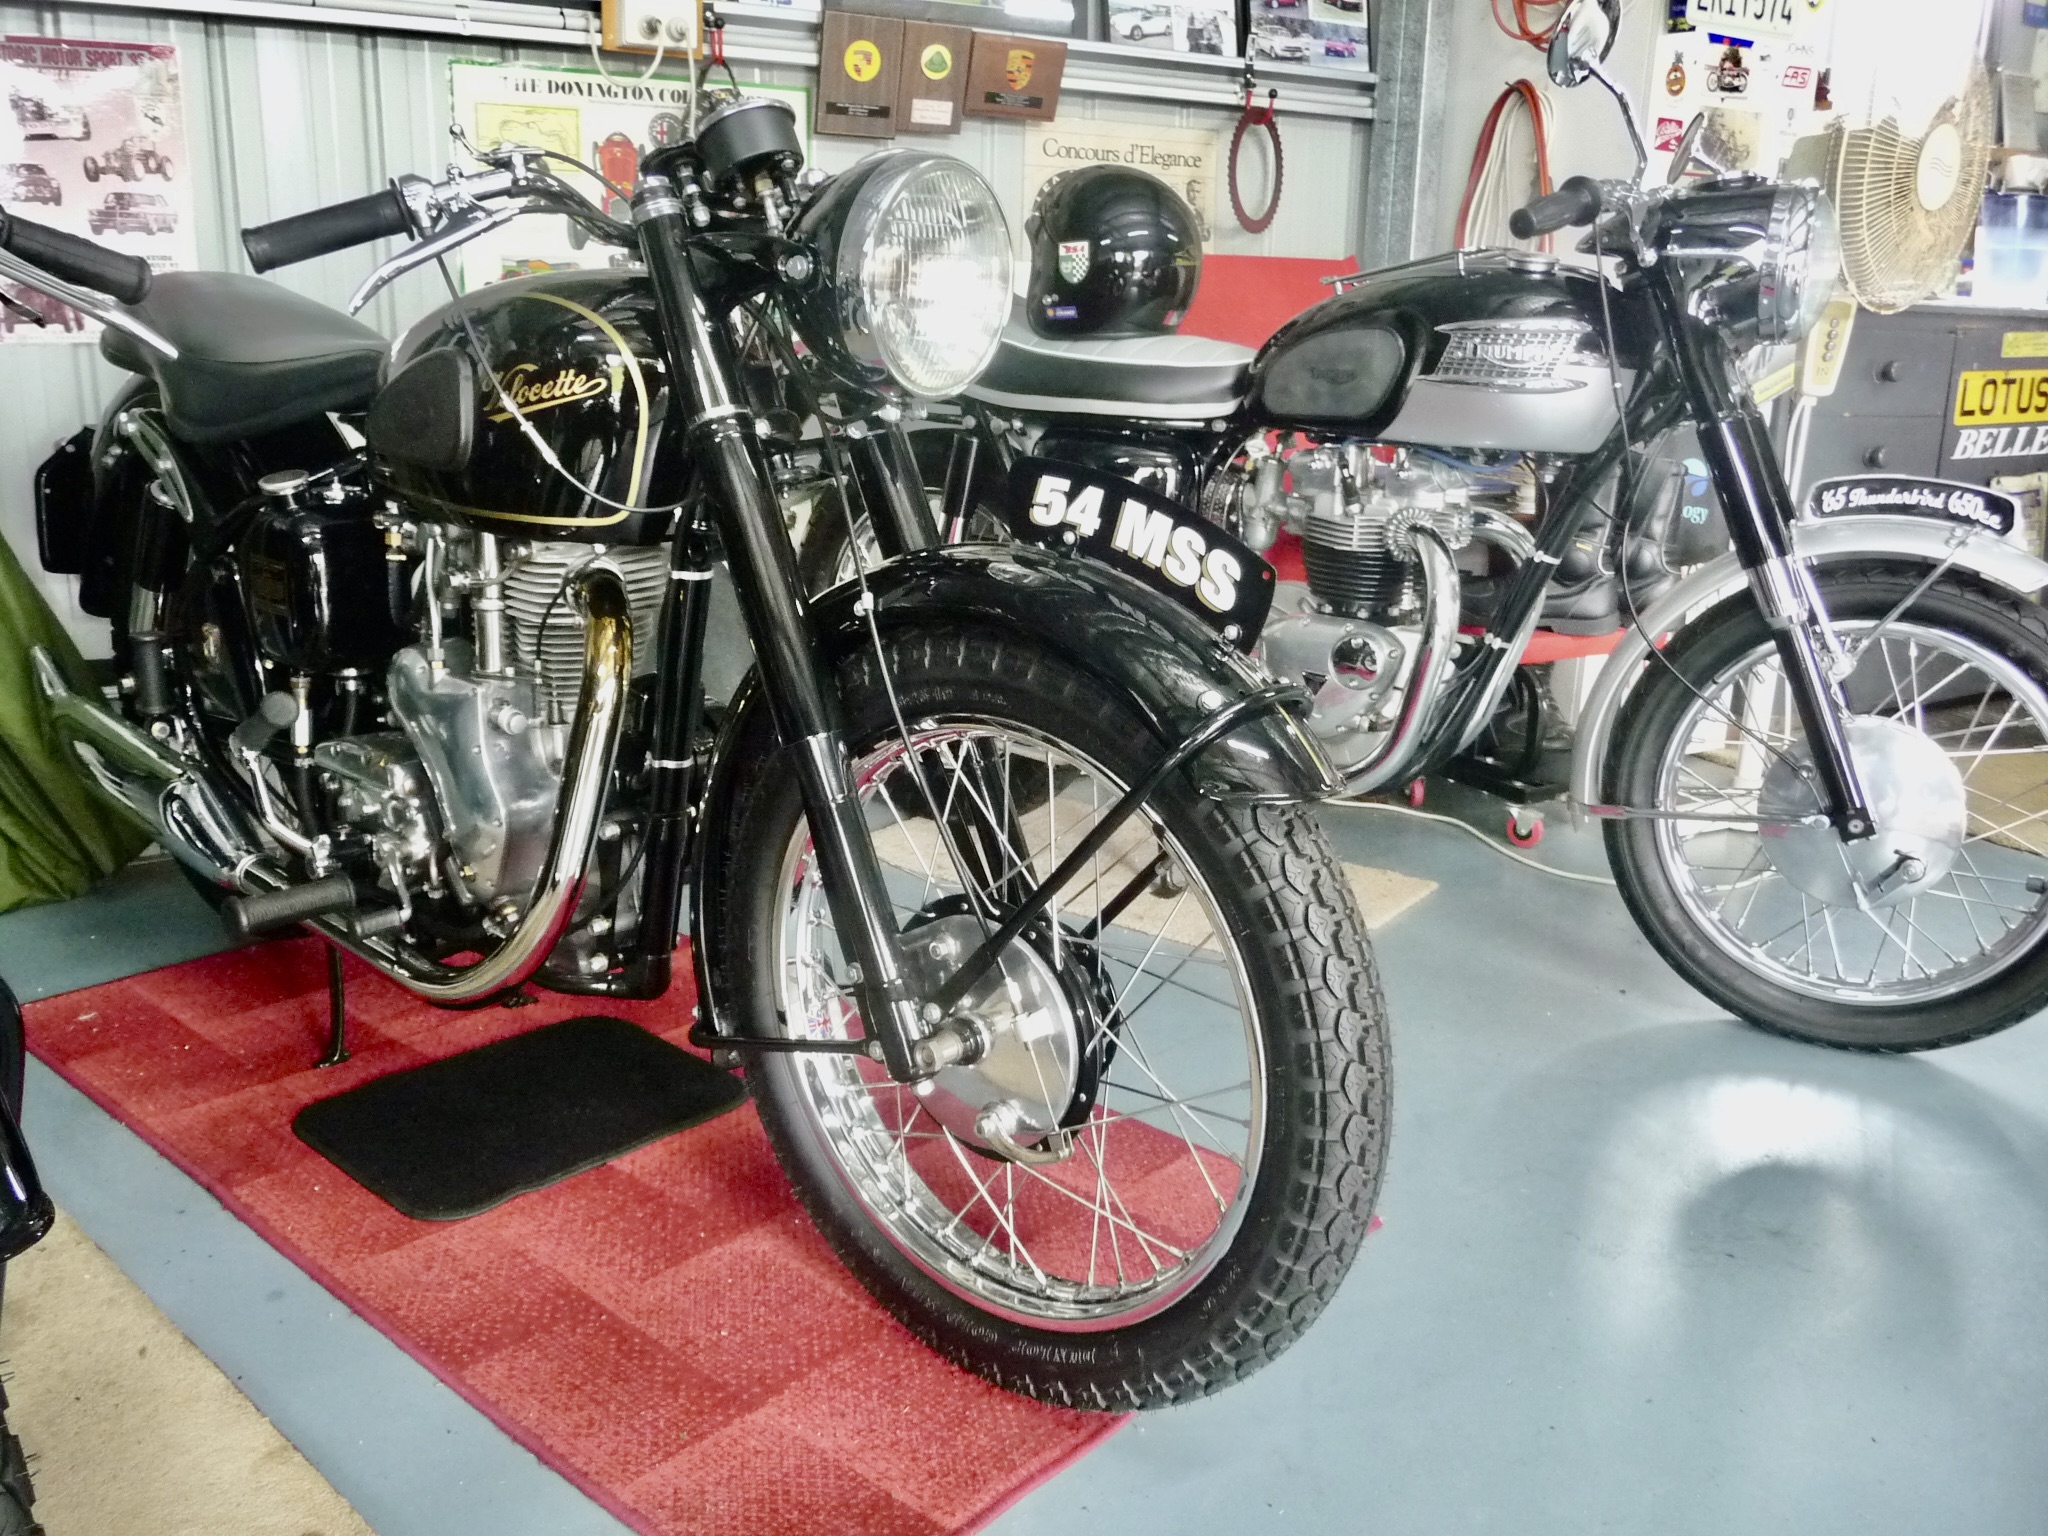 Classic motorcycles on show